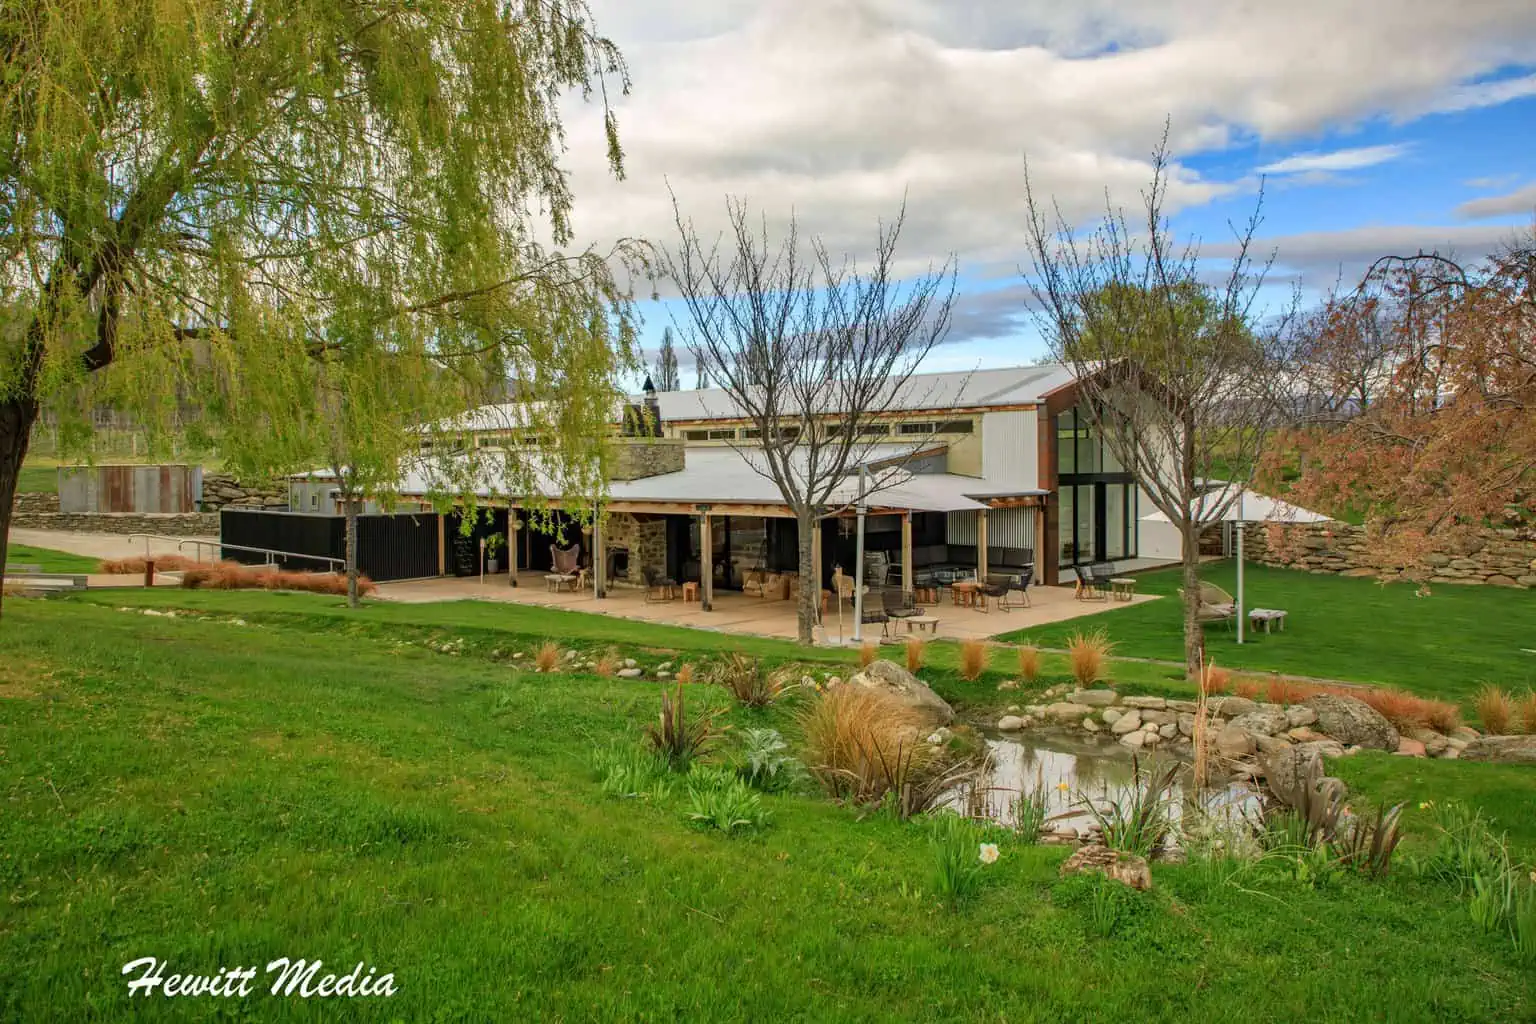 Central Otago Wine Valleys Guide - Cloudy Bay Winery